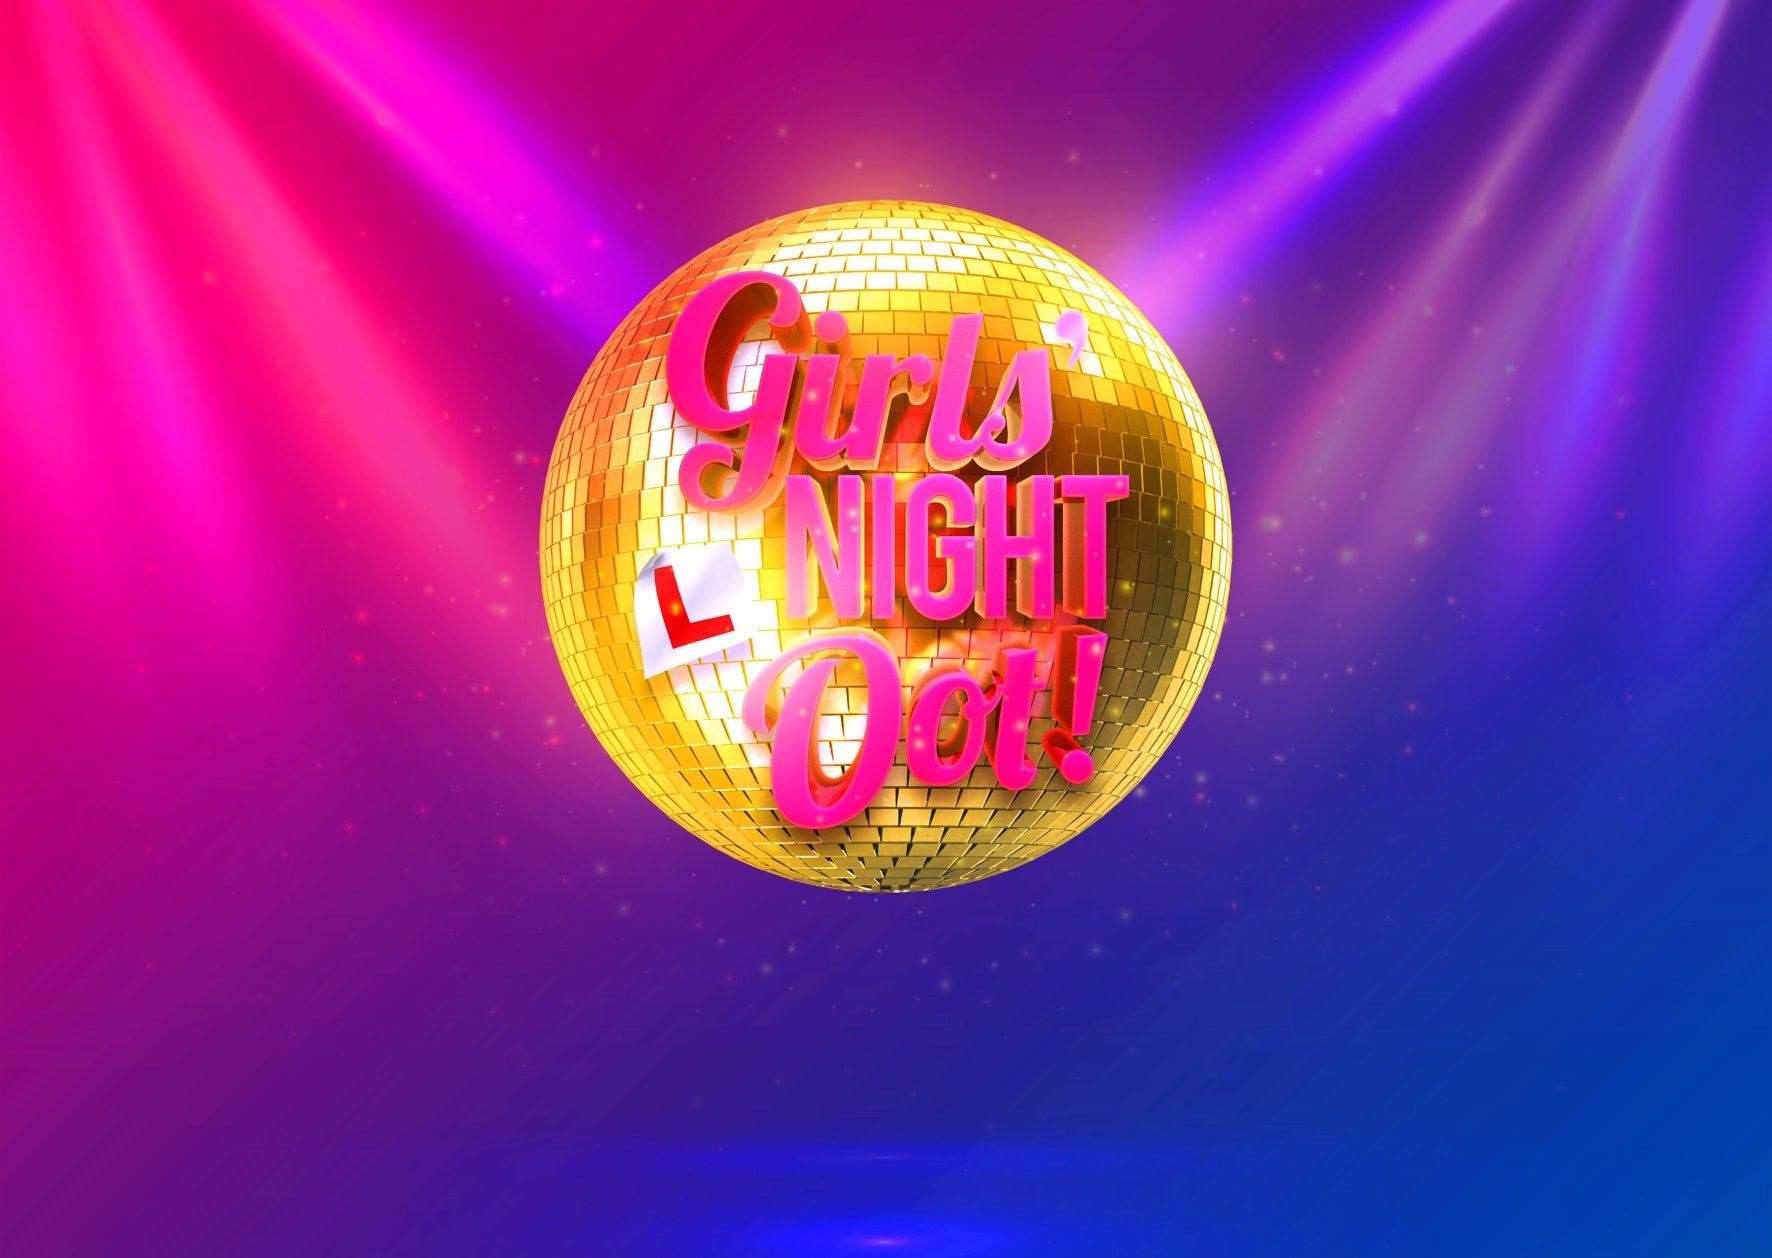 Enjoy an evening of retro soundtracks with Girls Night Oot.